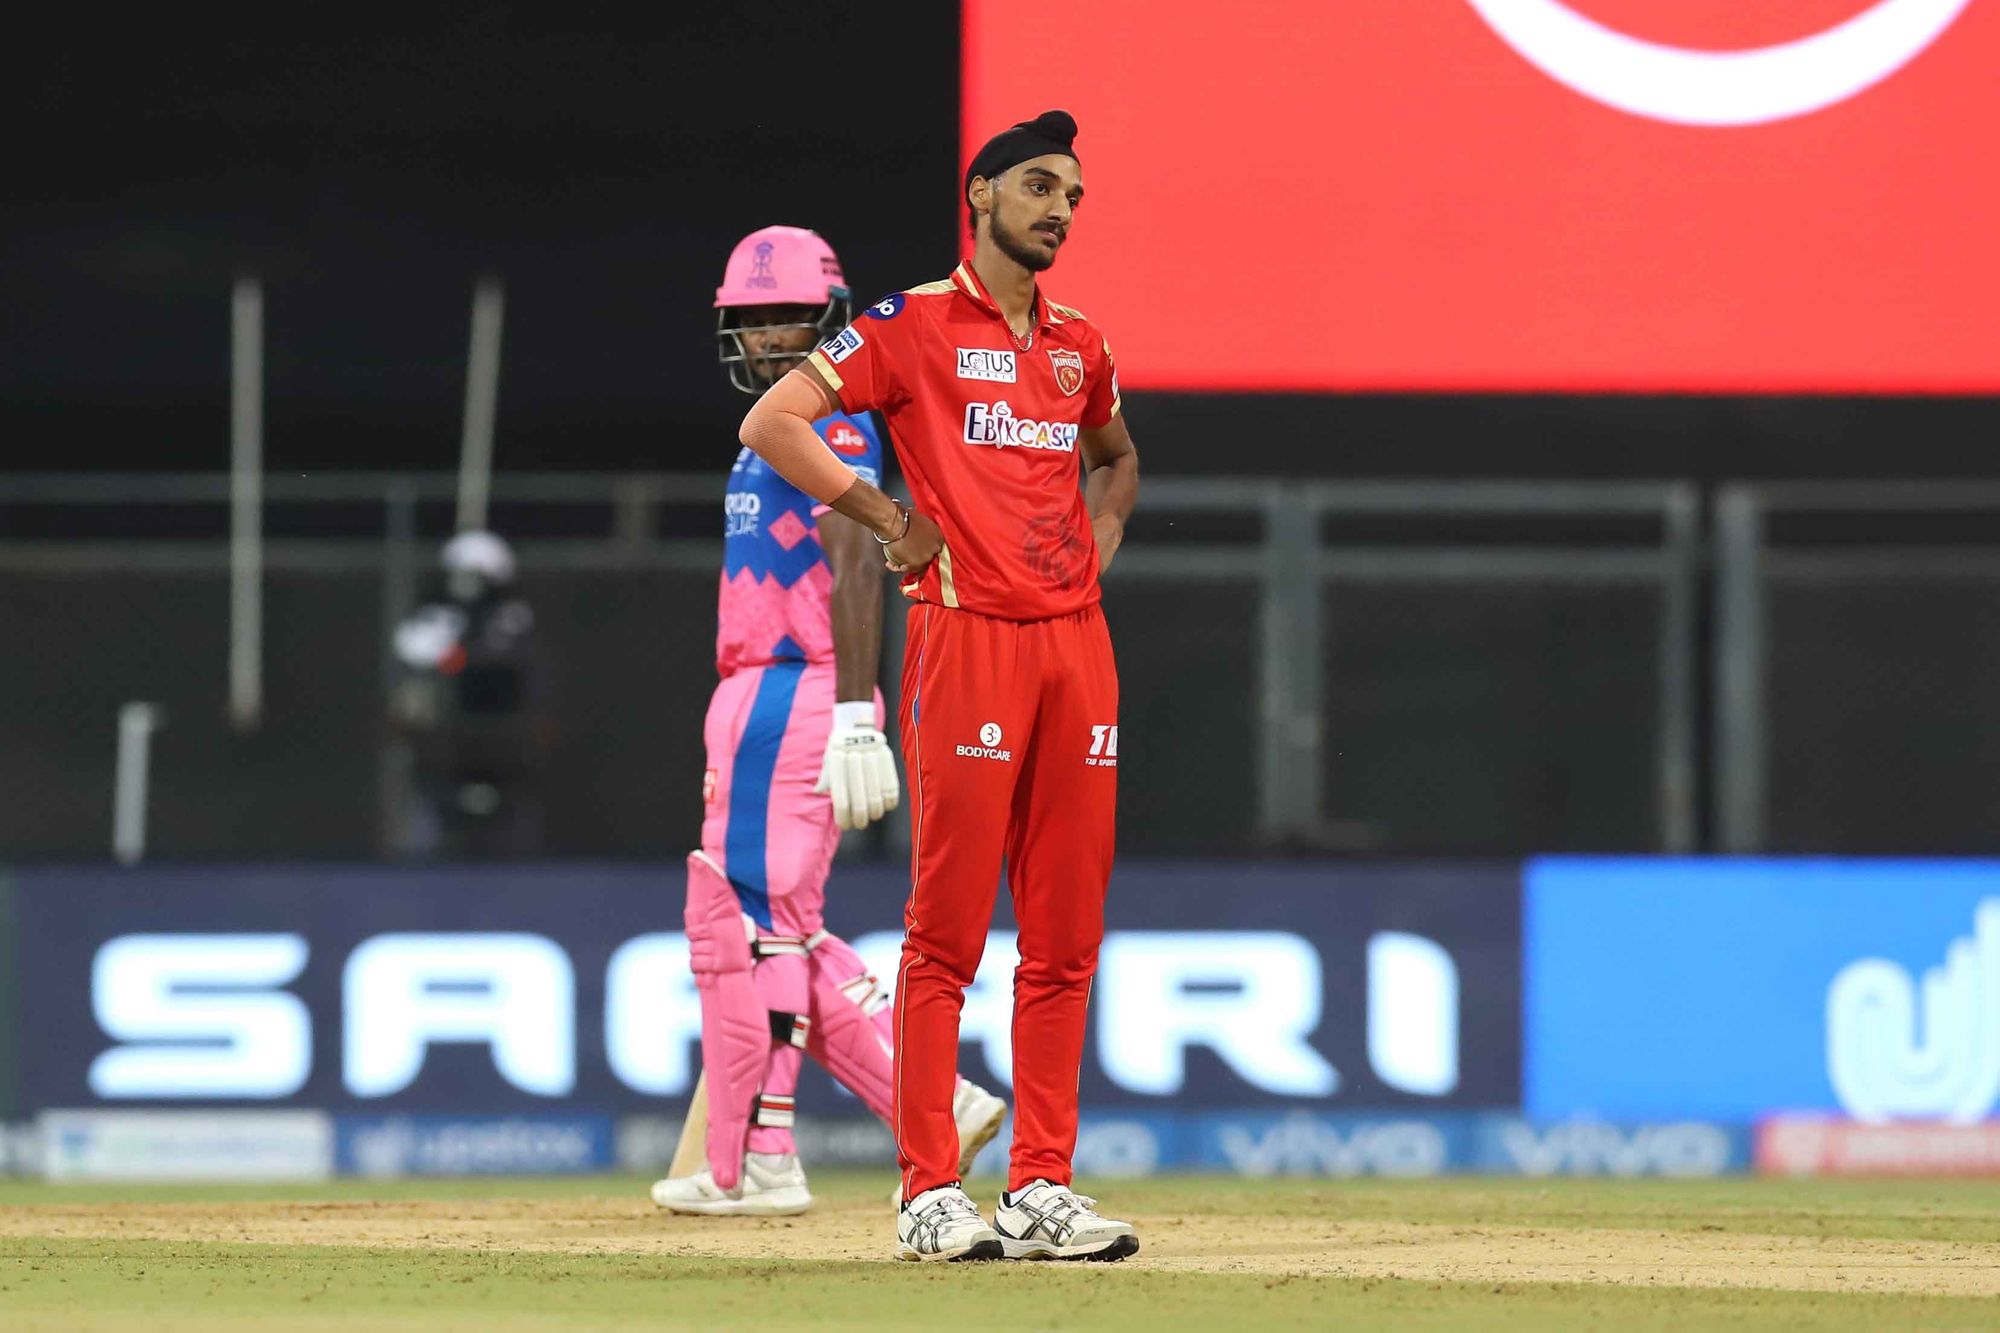 IPL 2022 | Arshdeep Singh has bowled some lovely yorkers in death overs and has a lot of control, opines Dinesh Karthik